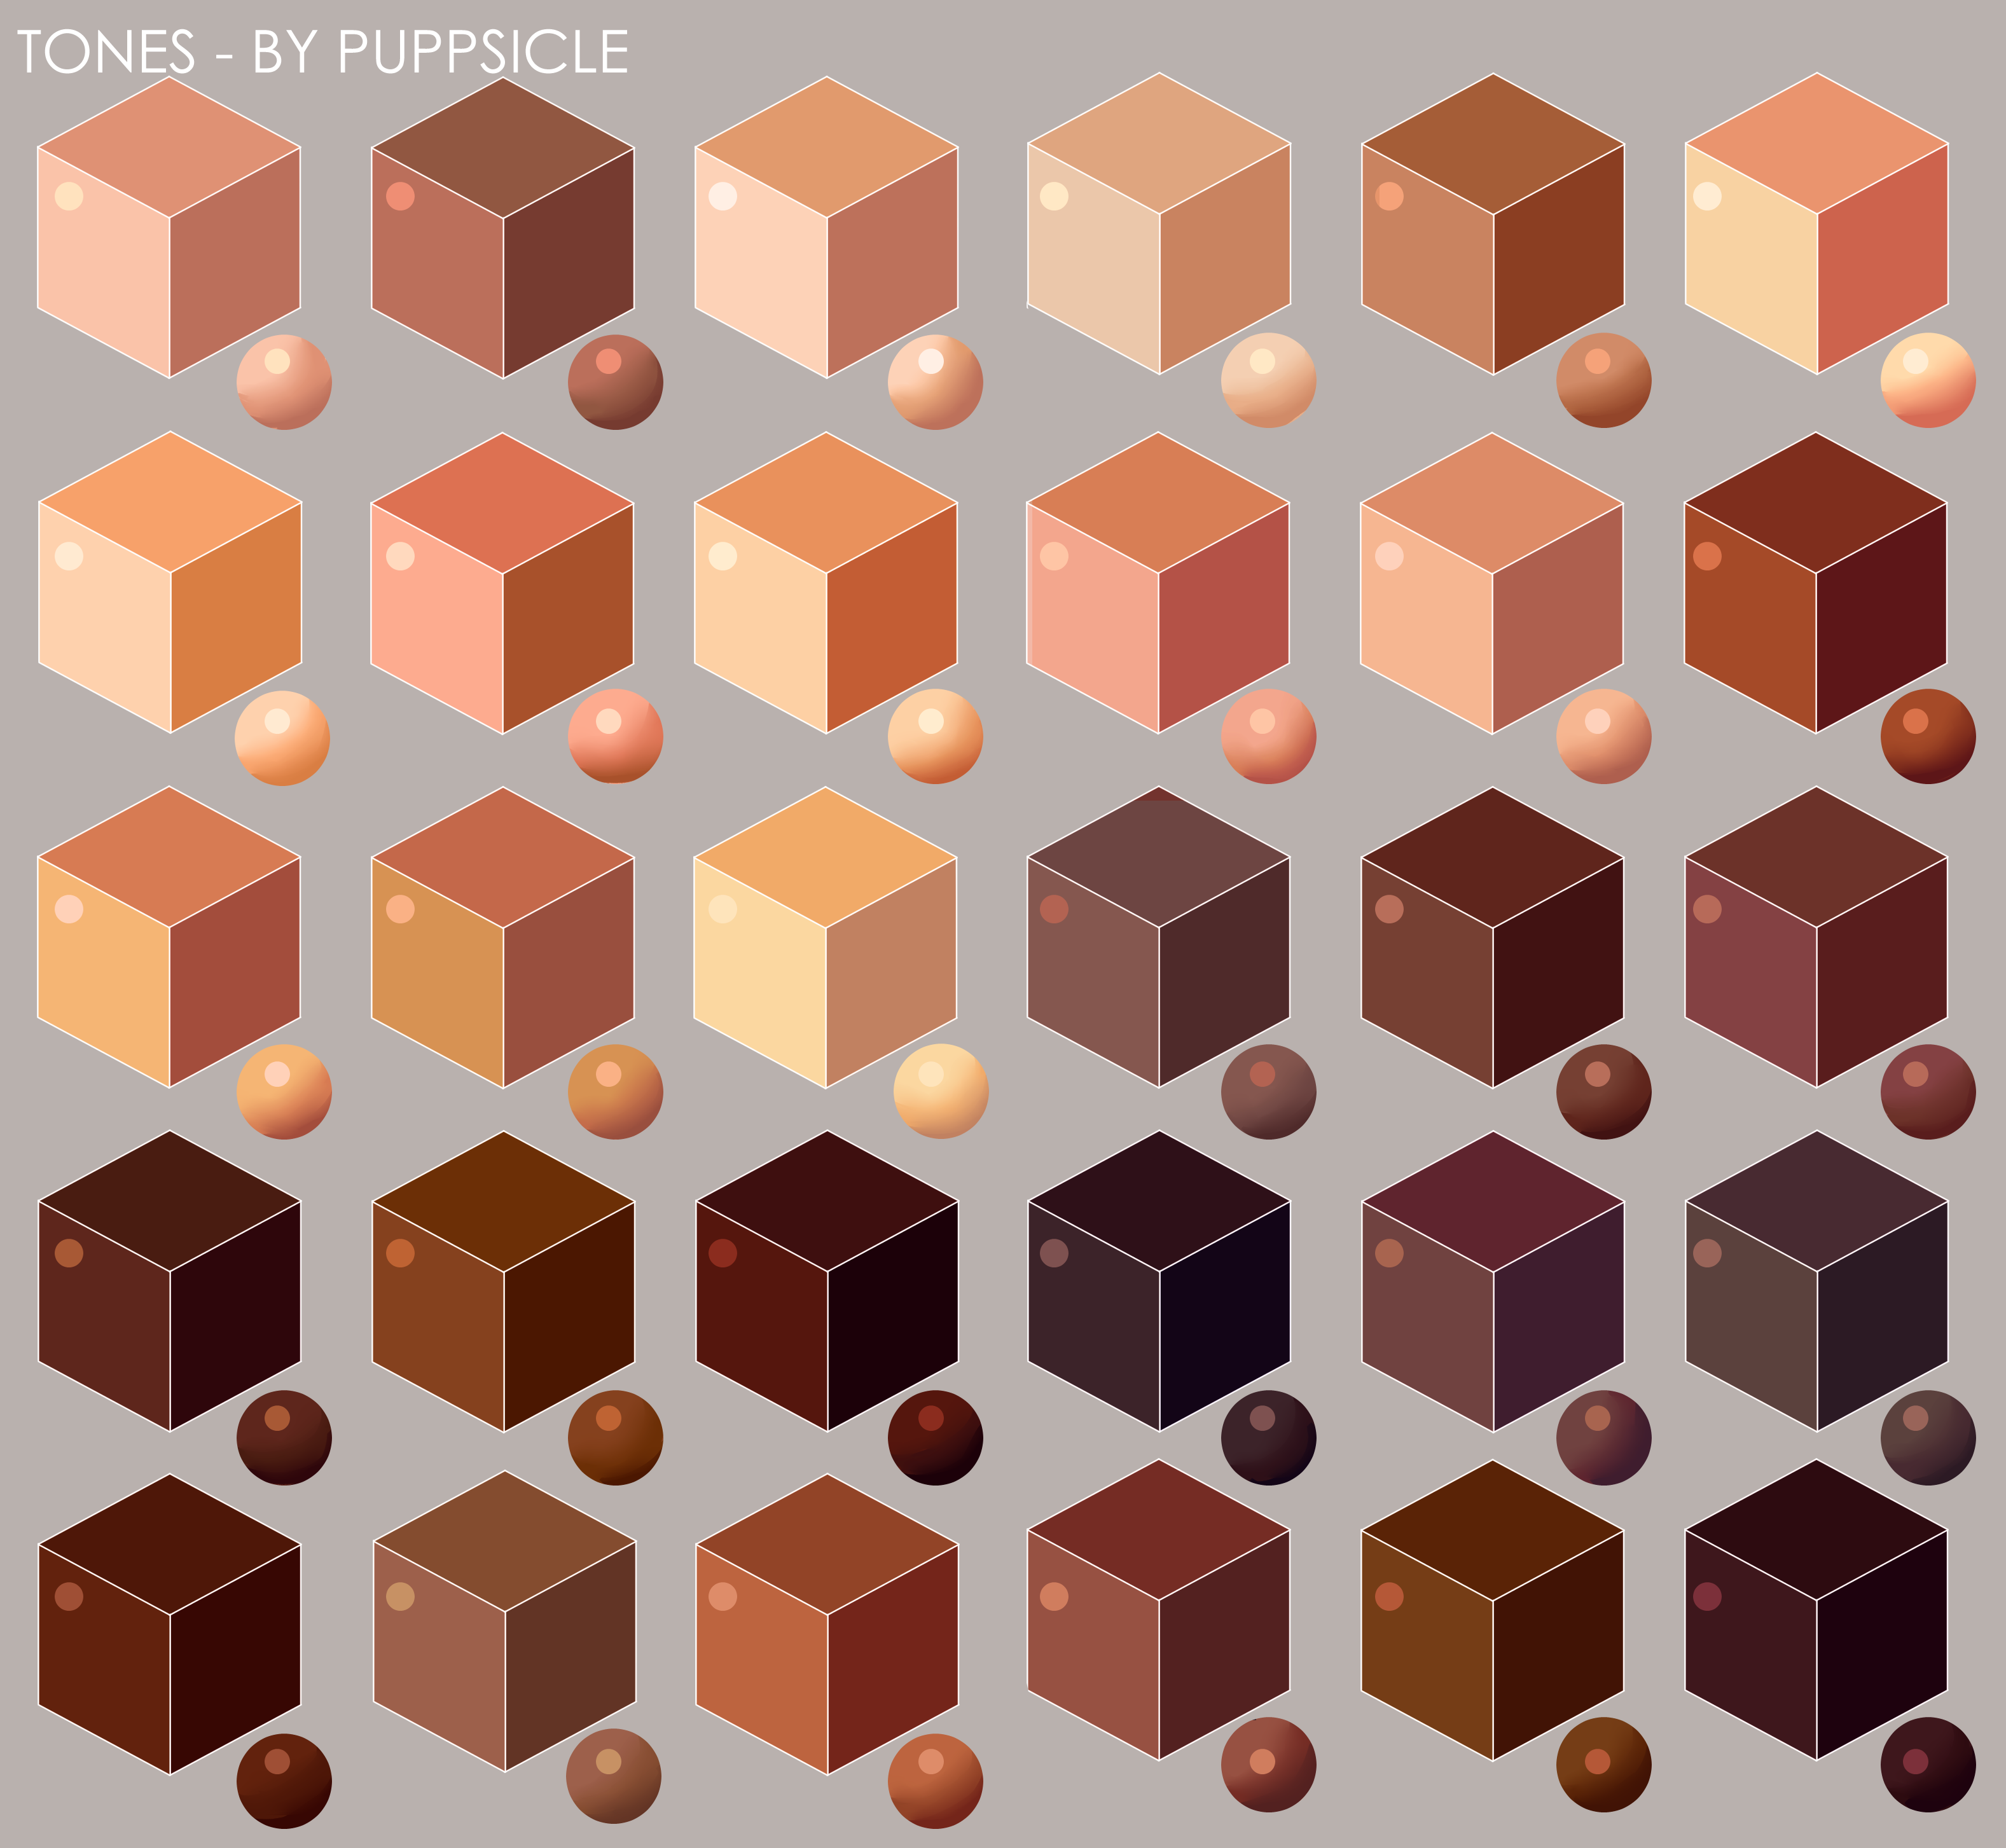 skin-tone-cubes-free-to-use-by-puppsicle-on-deviantart